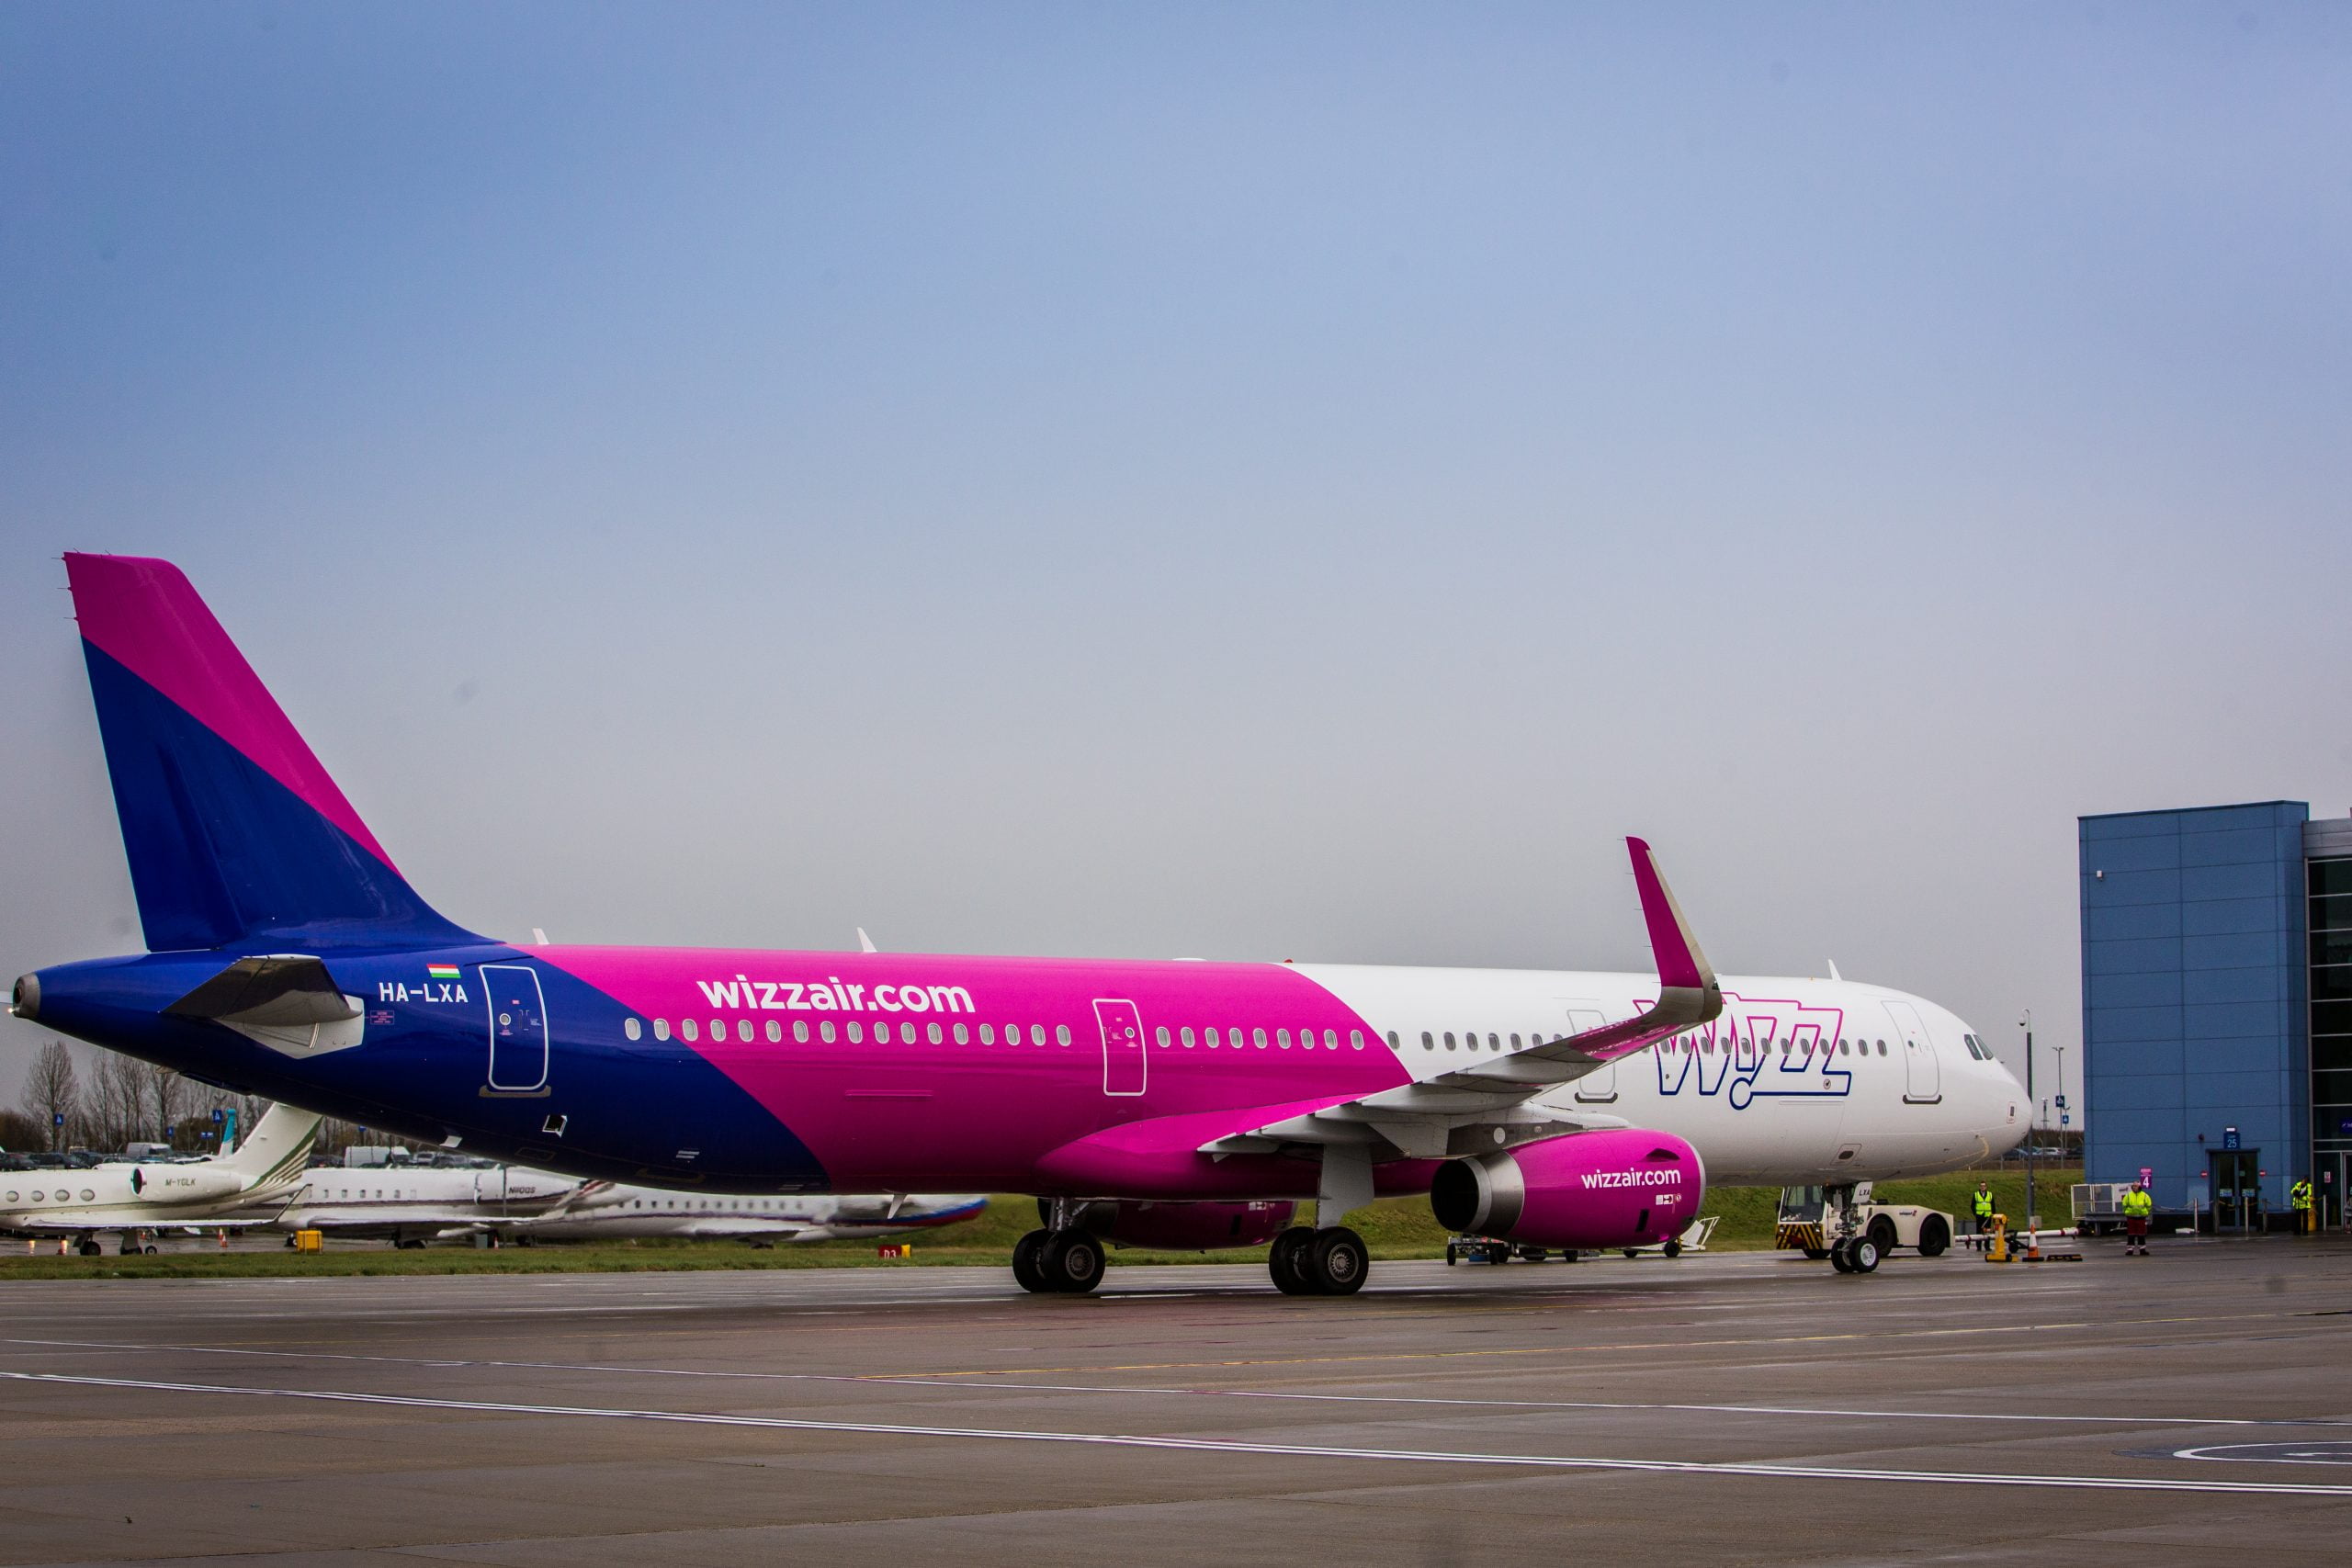 Two new routes for the airline Wizz Air